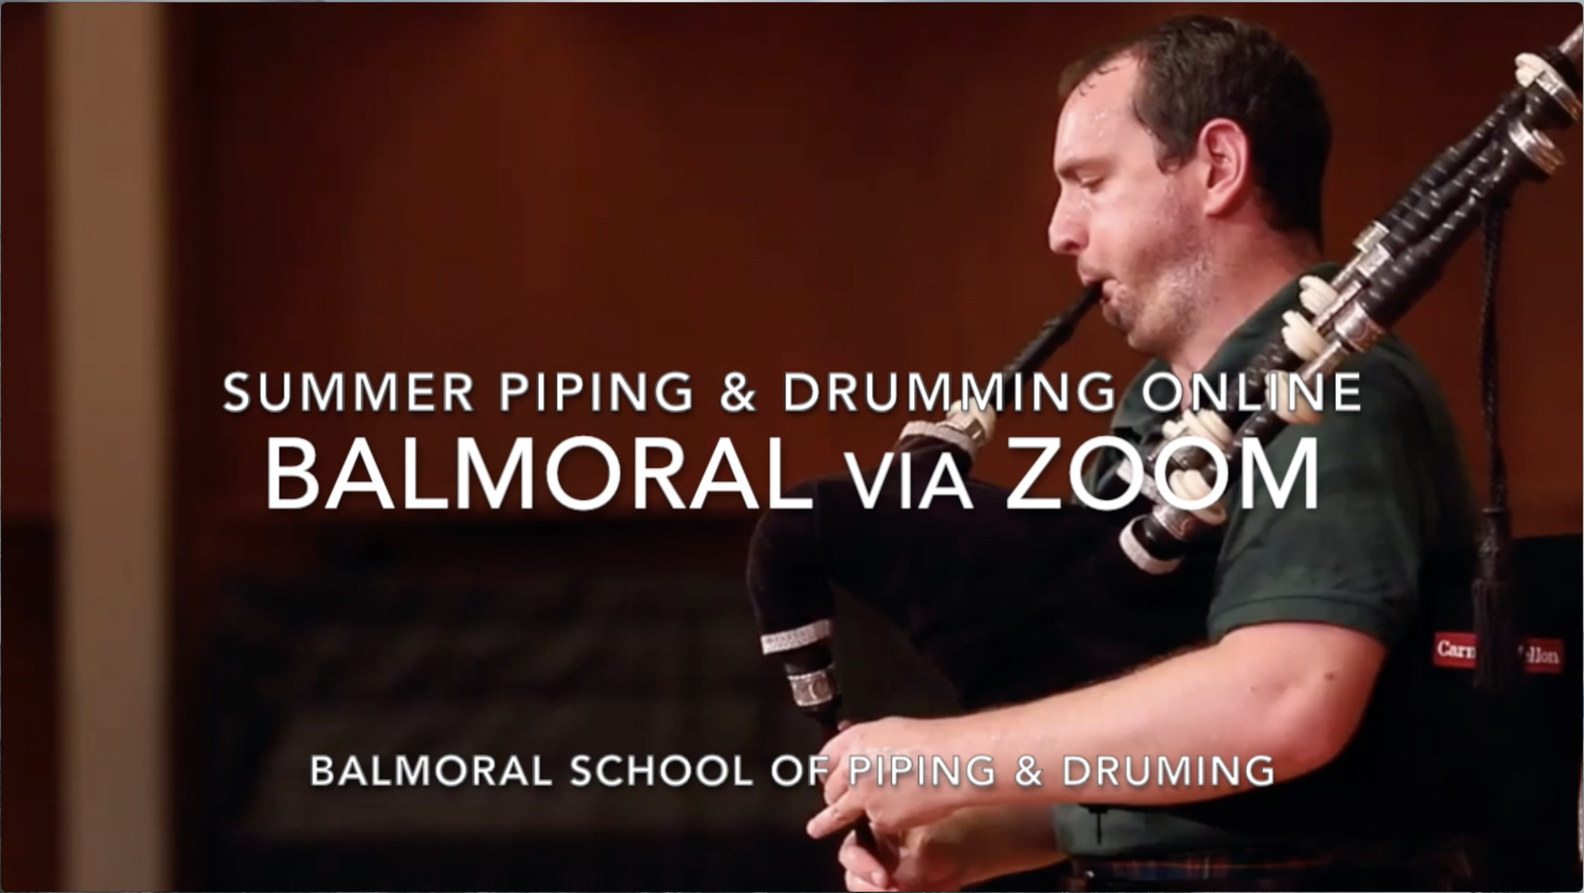 Balmoral offers summer schools in Bagpiping & Drumming via Zoom.